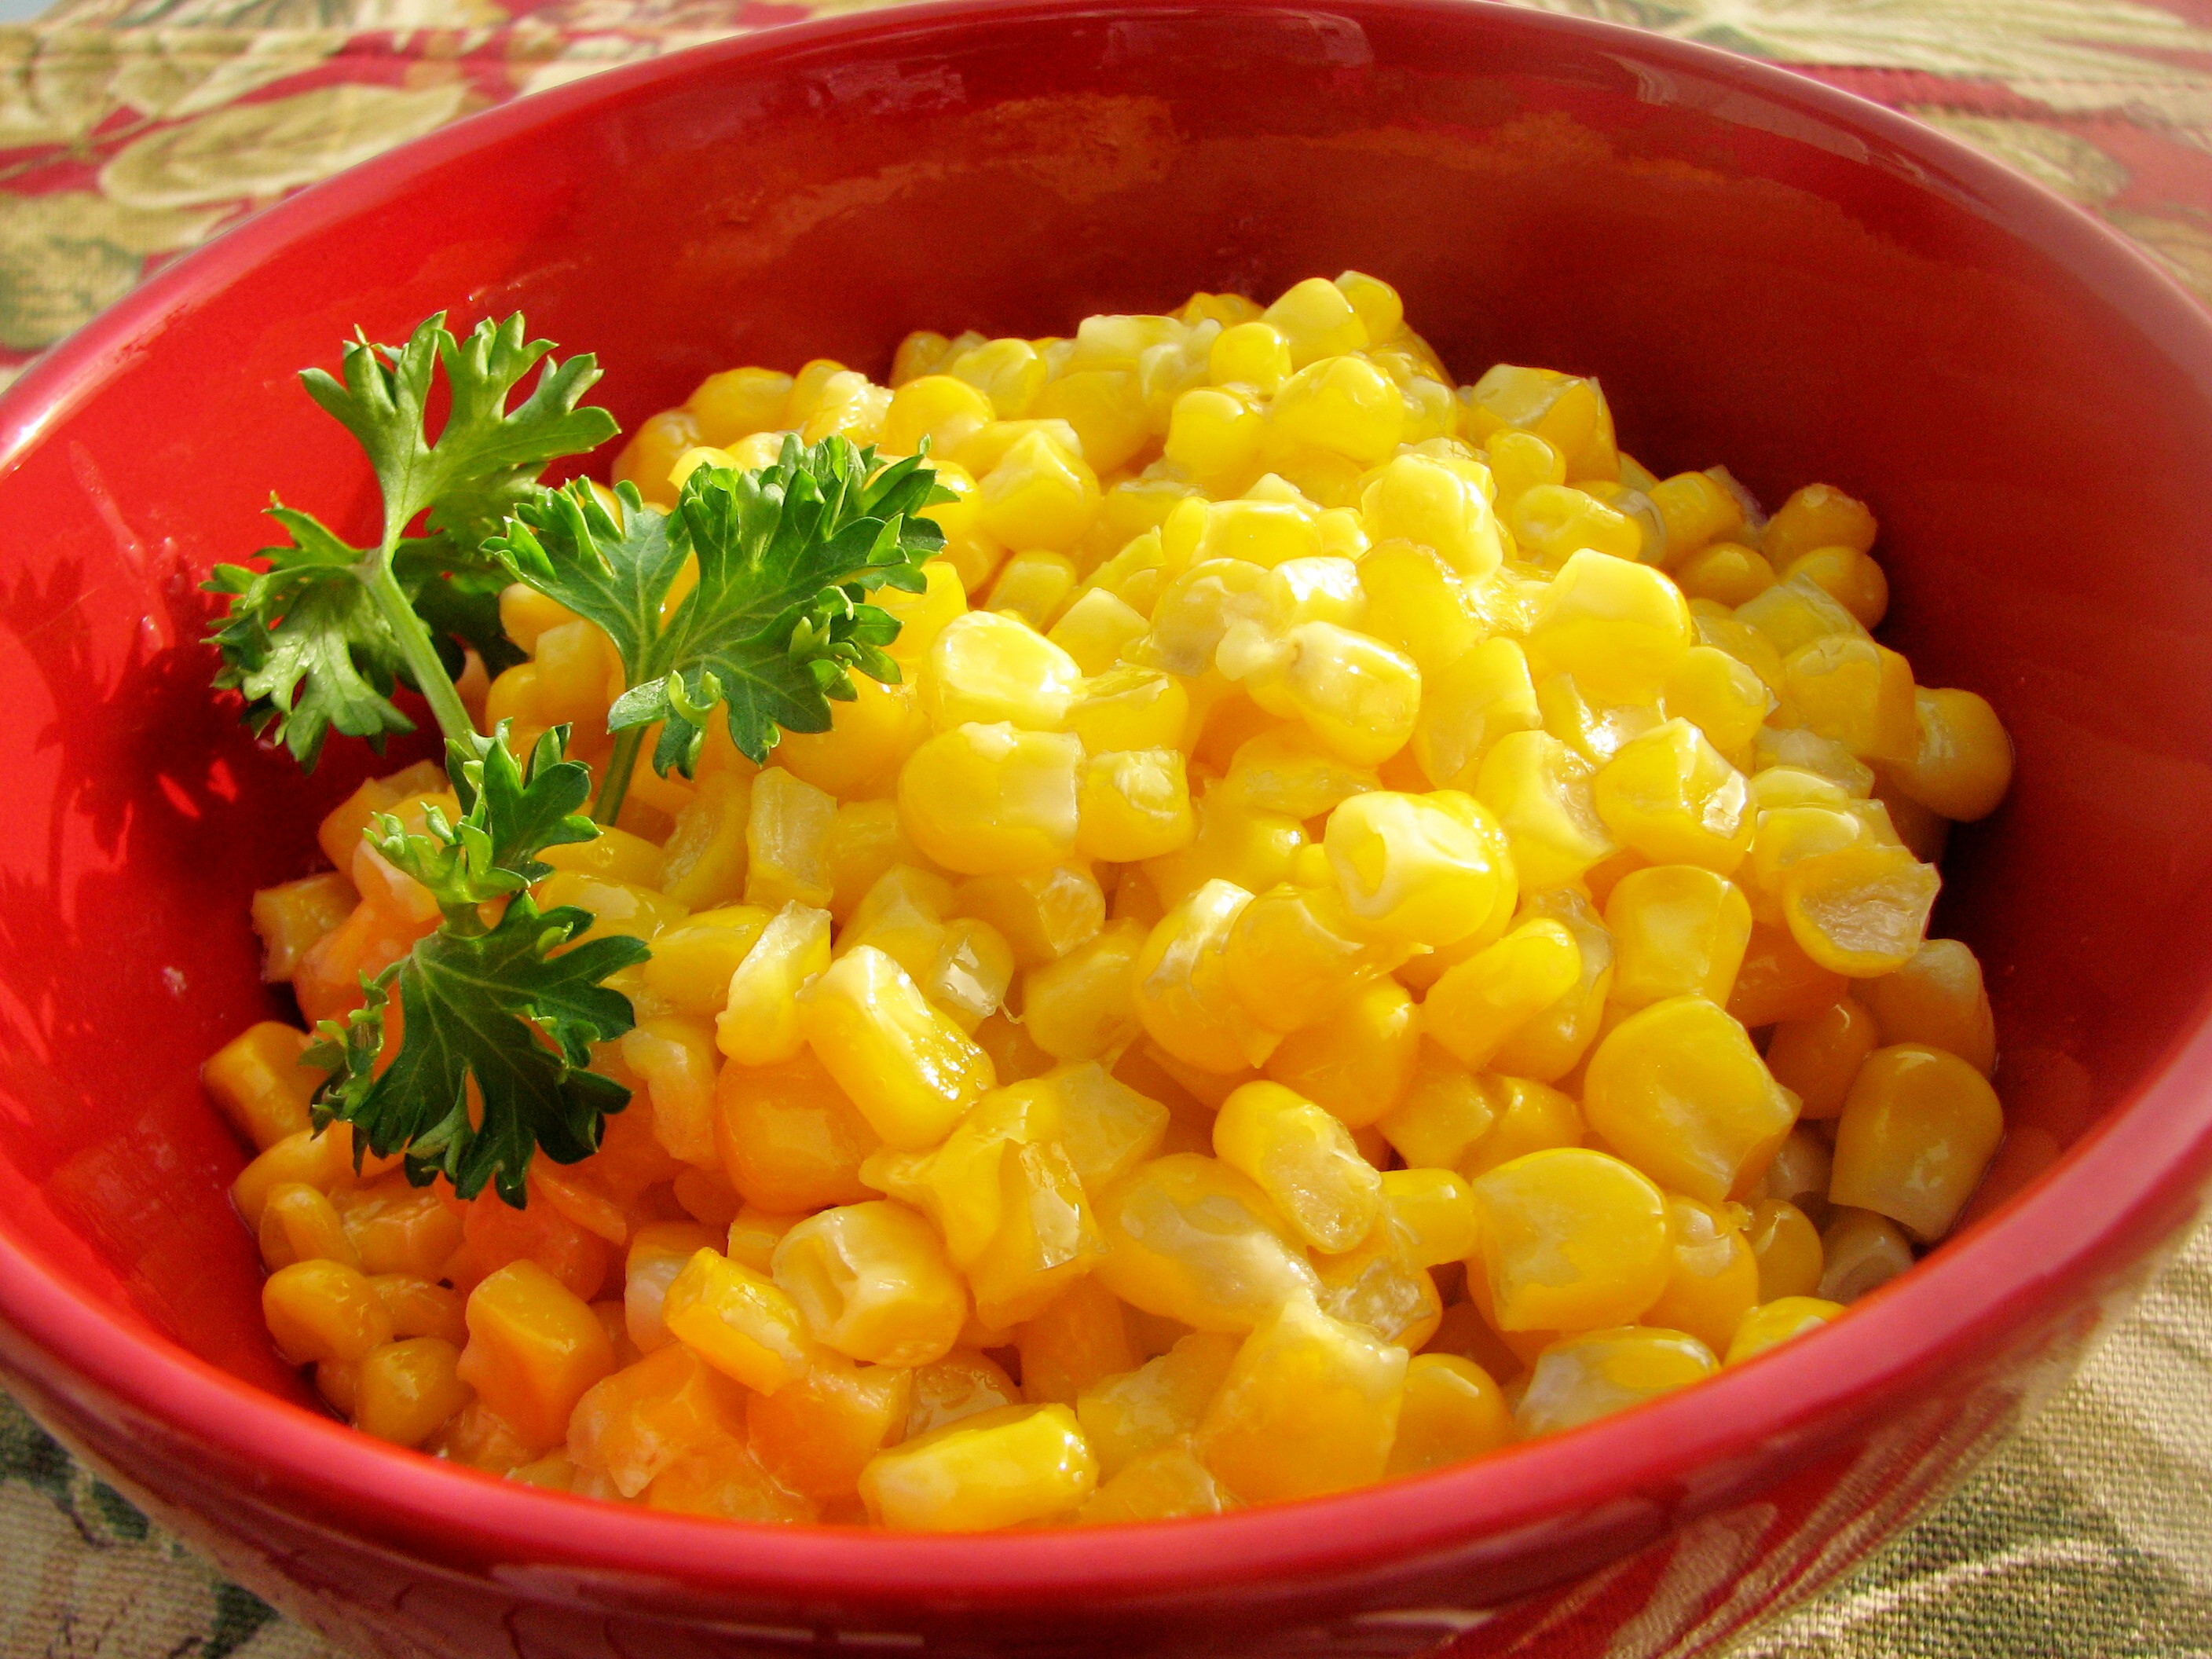 ❂ Easy COPYCAT GREEN GIANT NIBLETS CORN IN BUTTER SAUCE